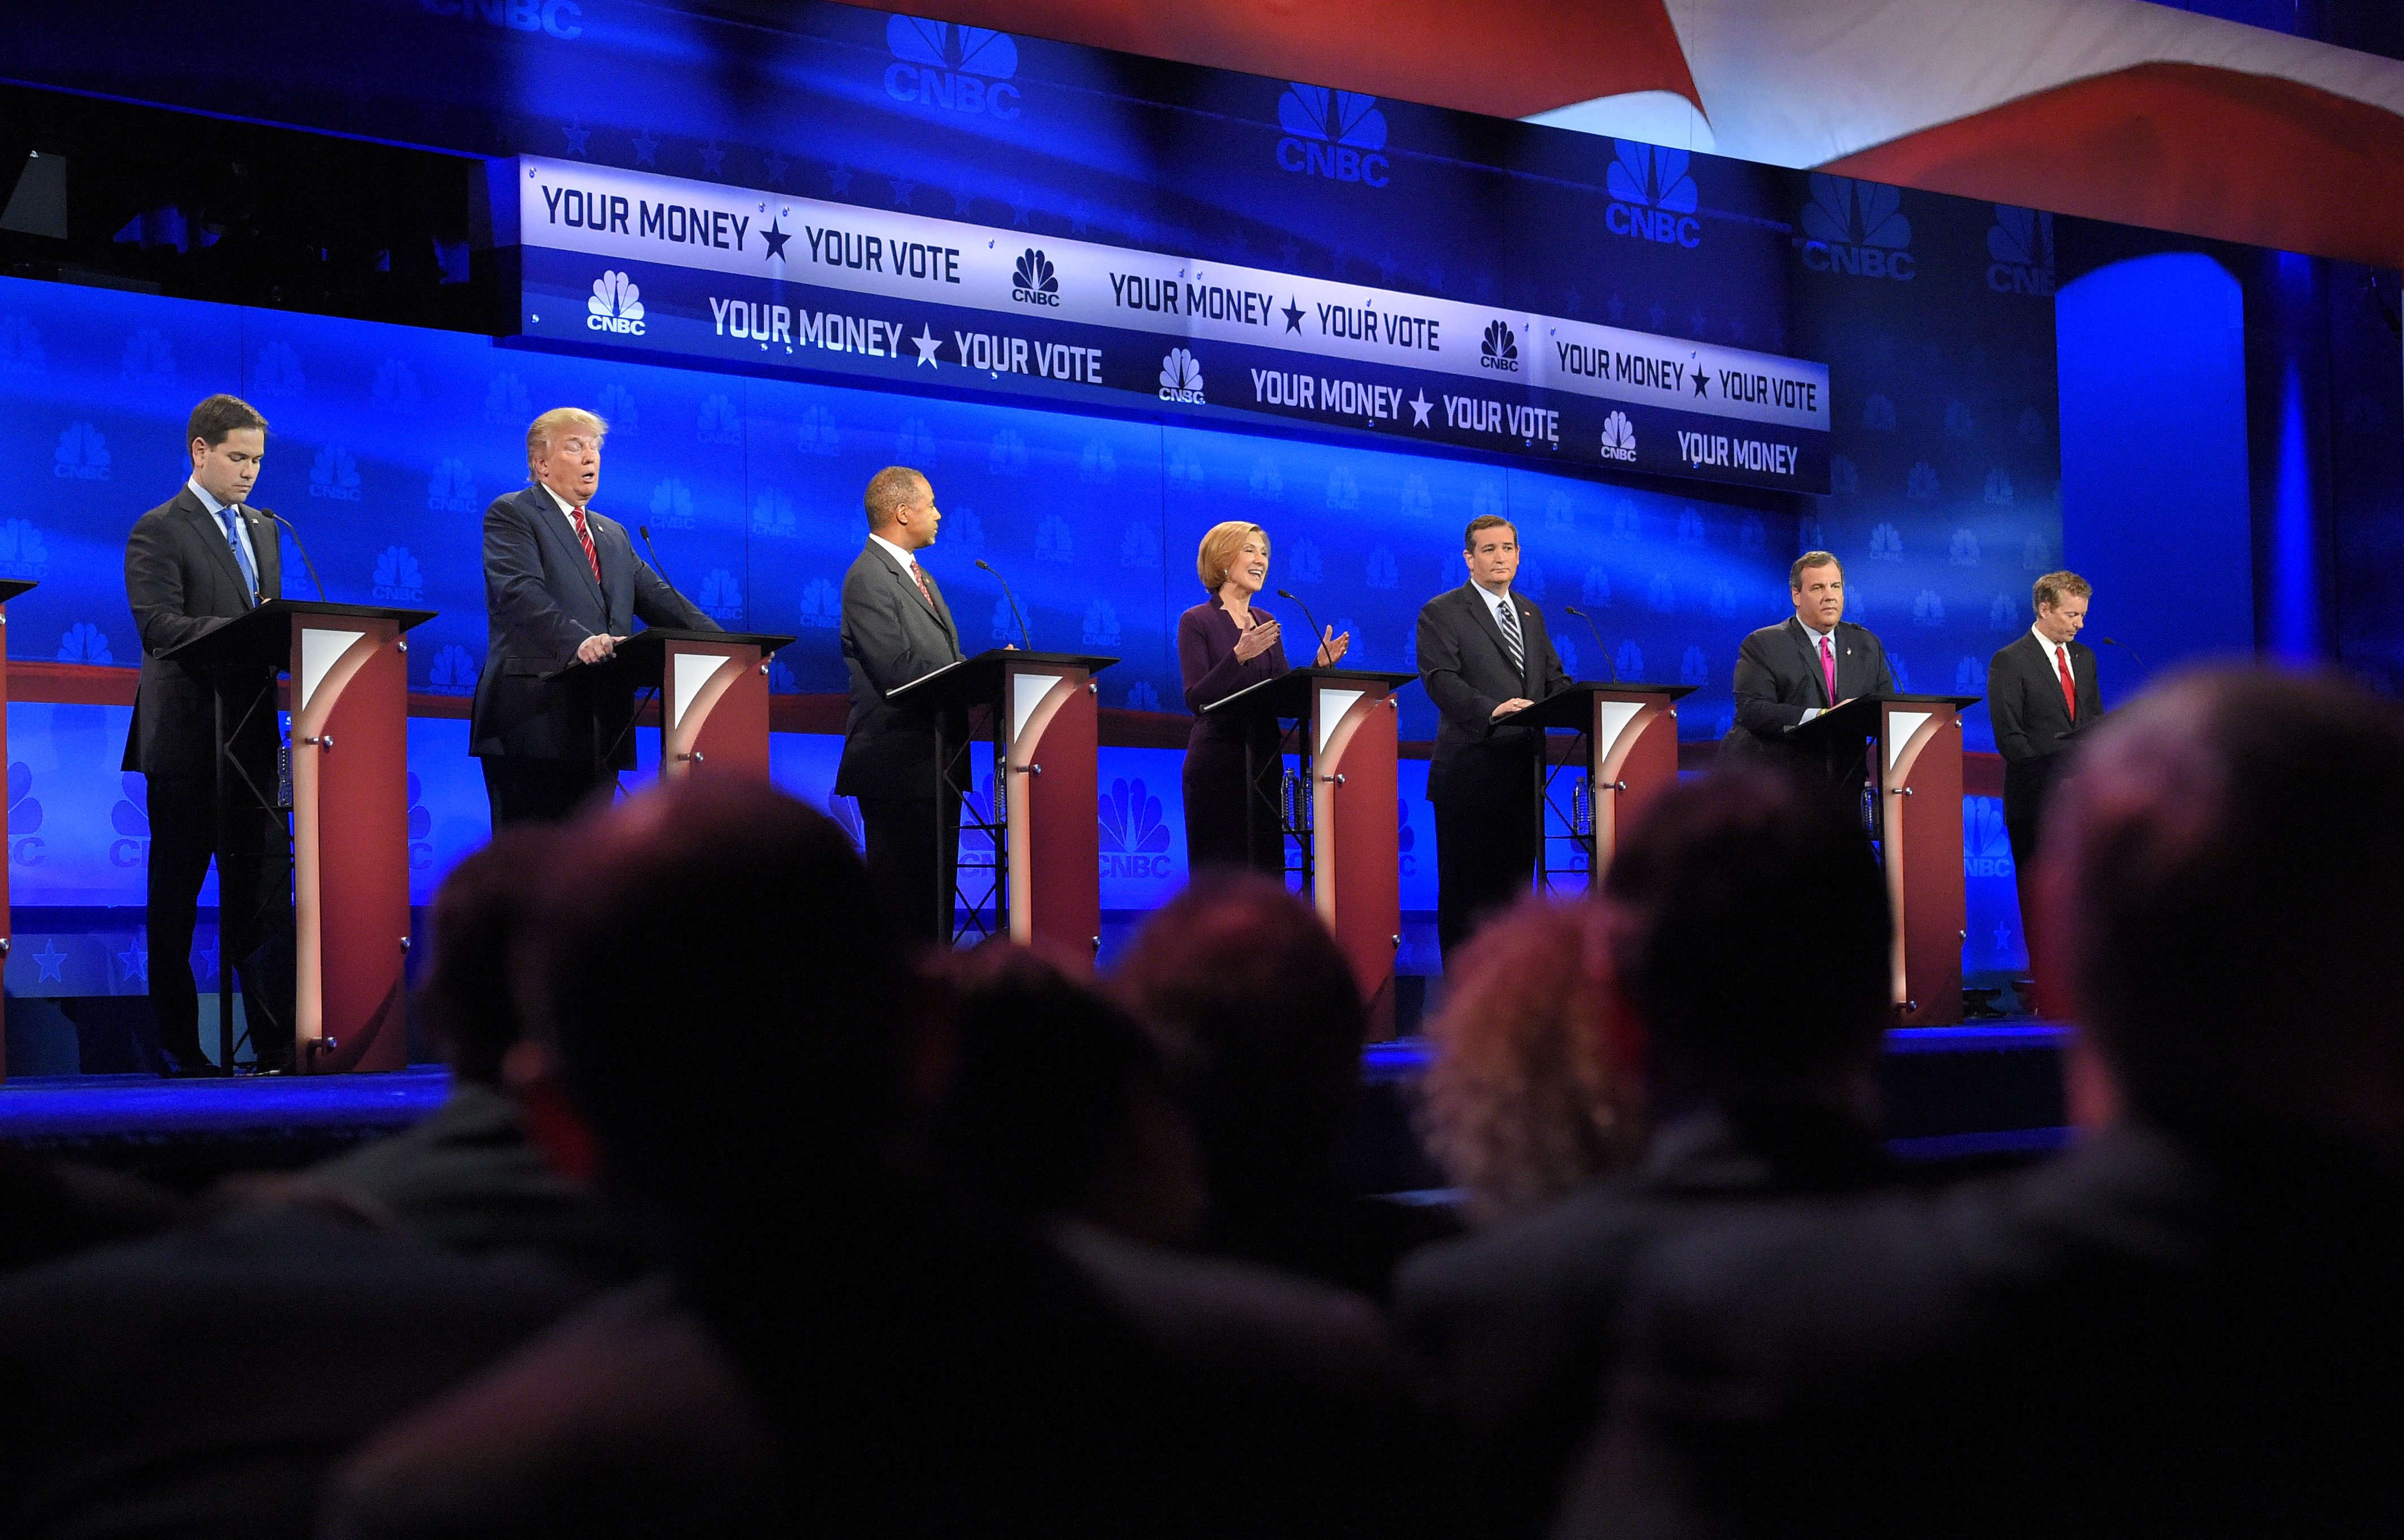 Republican presidential candidates, from left, Marco Rubio, Donald Trump, Ben Carson, Carly Fiorina, Ted Cruz, Chris Christie, and Rand Paul take the stage during the CNBC Republican presidential debate at the University of Colorado on Oct. 28, 2015, in Boulder, Colo. (Mark J. Terrill—AP)